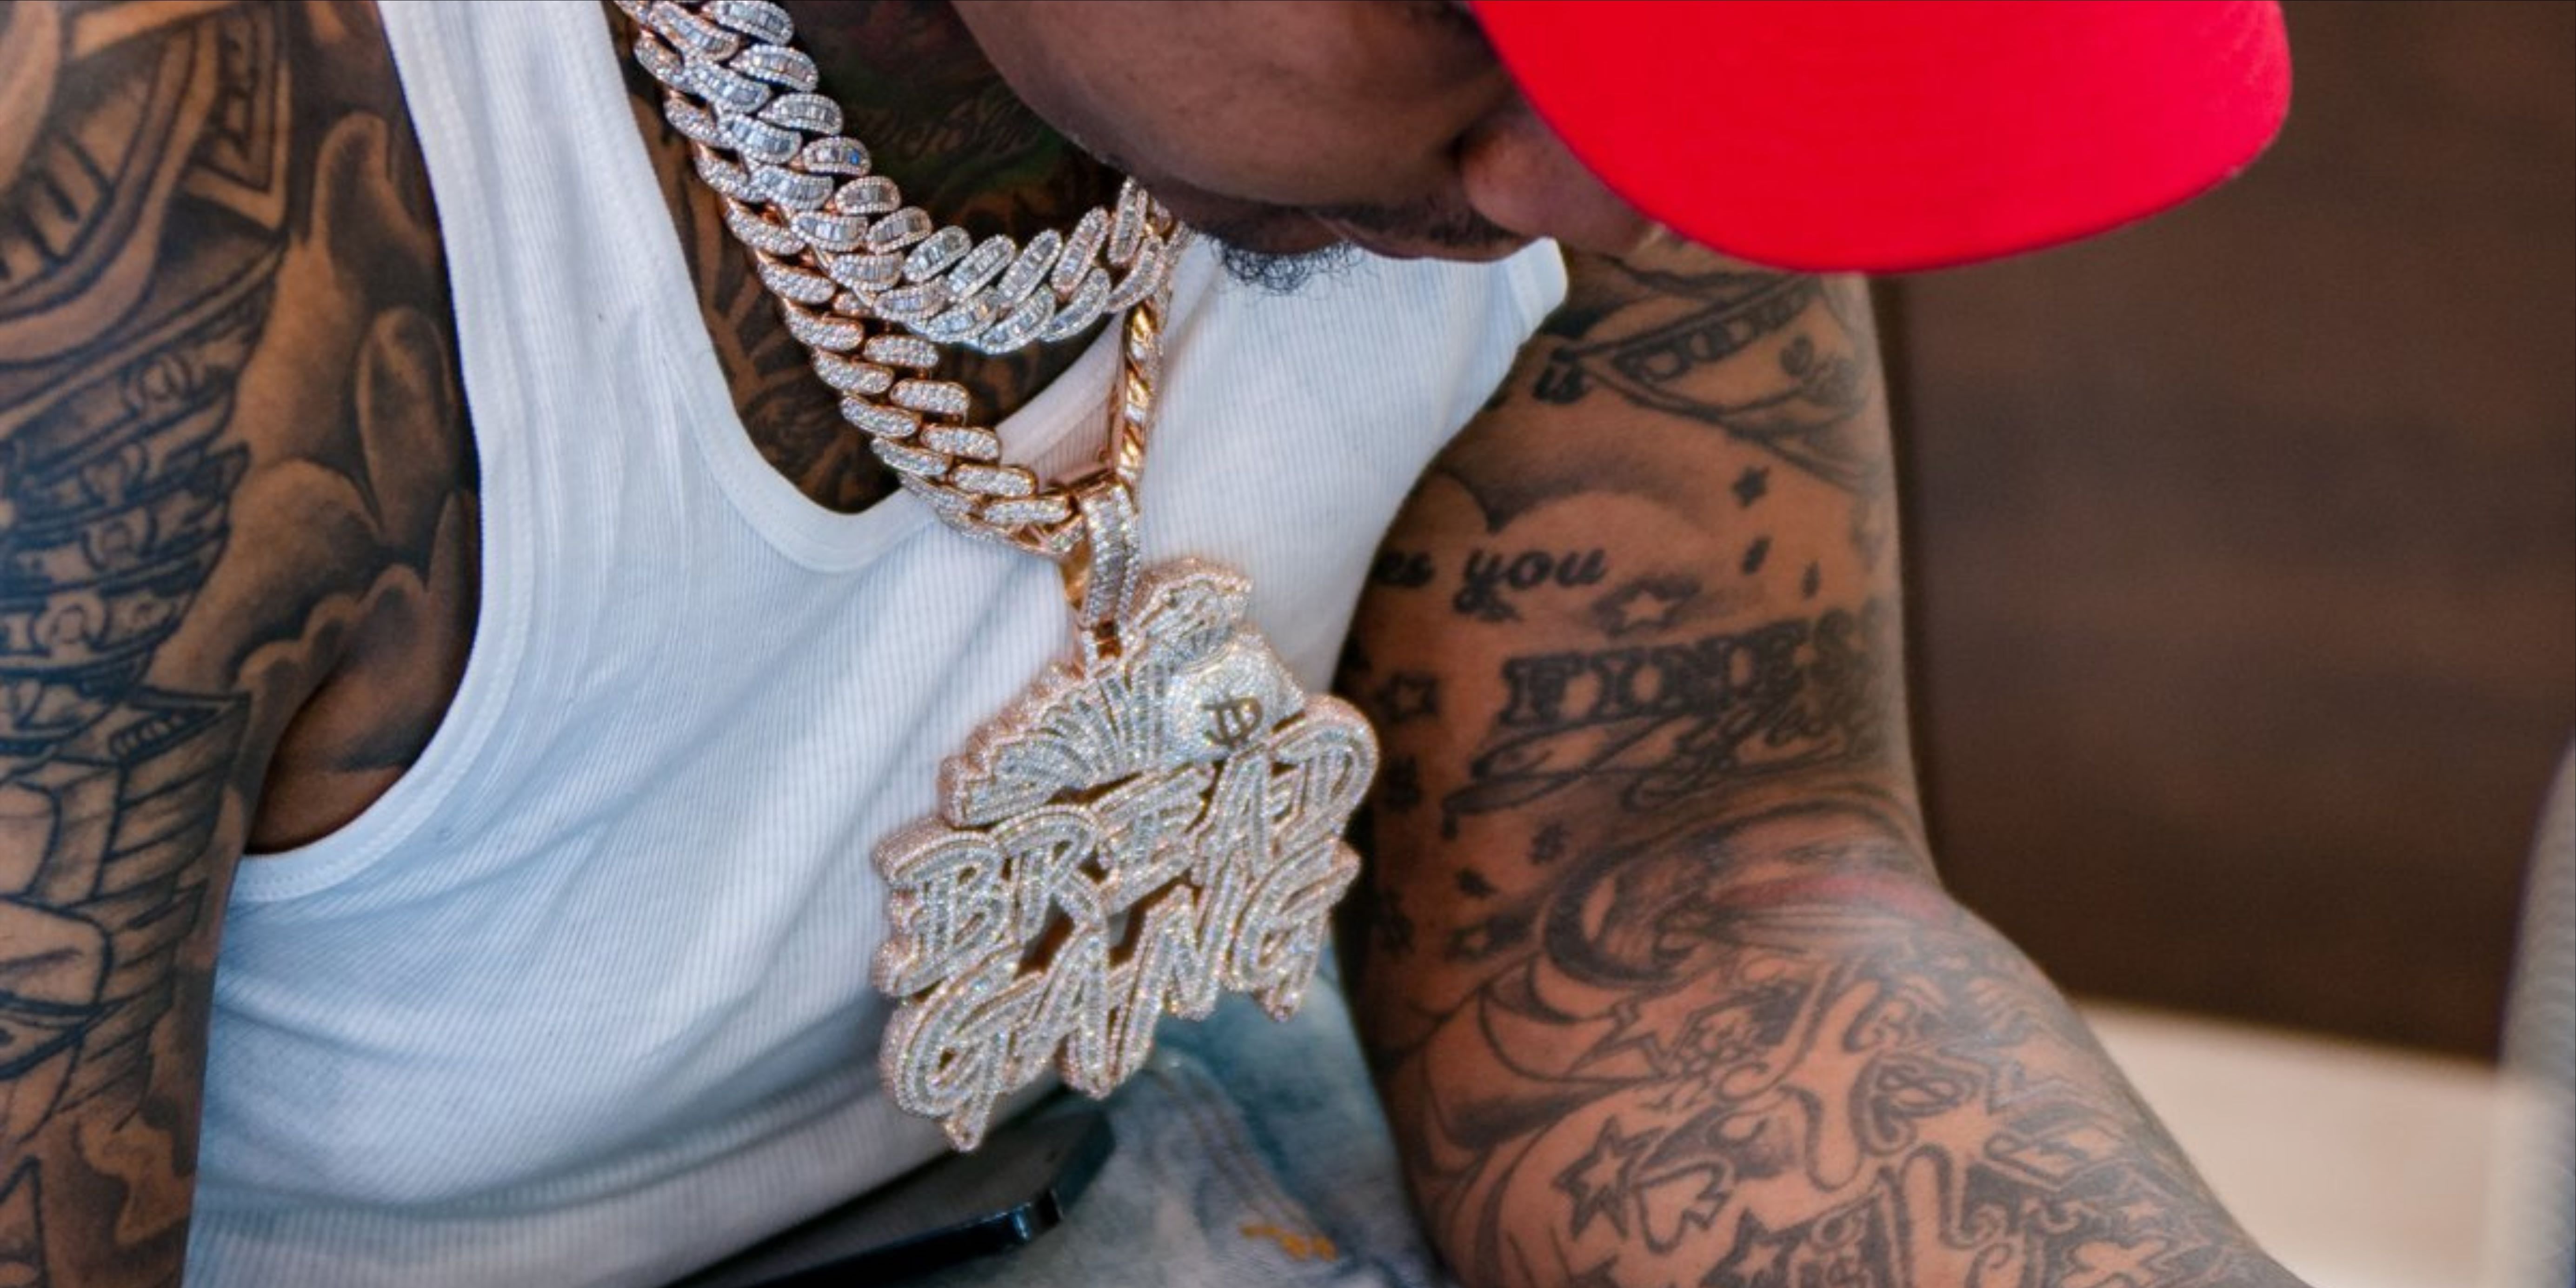 Moneybagg Yo: Clothes, Outfits, Brands, Style and Looks